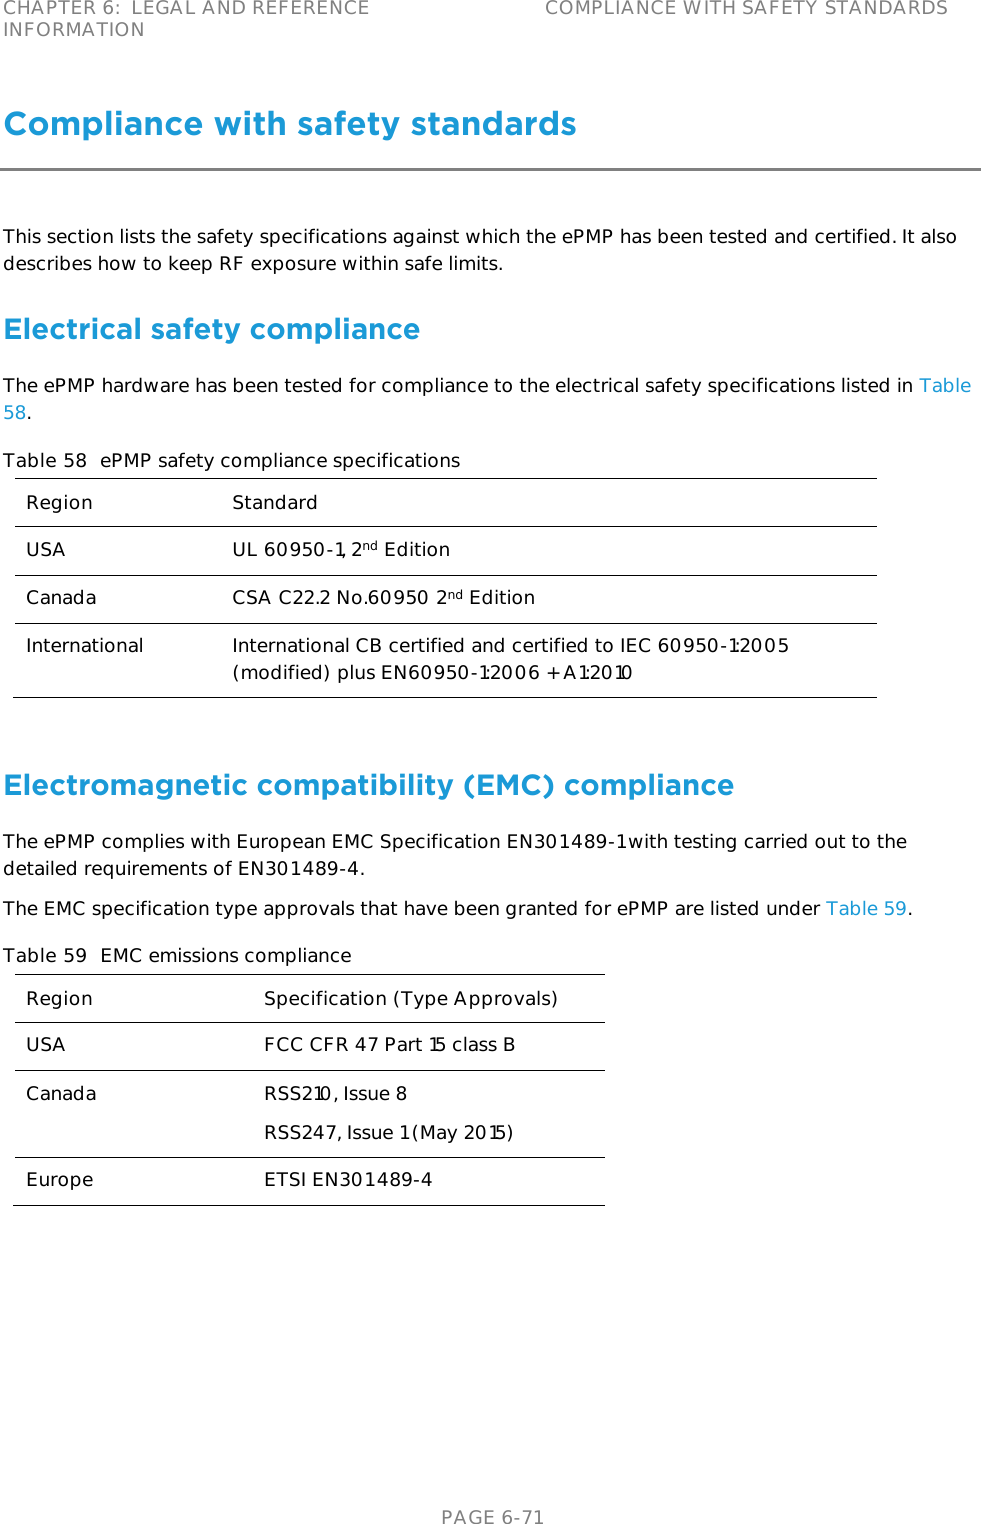 CHAPTER 6:  LEGAL AND REFERENCE INFORMATION COMPLIANCE WITH SAFETY STANDARDS   PAGE 6-71 Compliance with safety standards This section lists the safety specifications against which the ePMP has been tested and certified. It also describes how to keep RF exposure within safe limits. Electrical safety compliance  The ePMP hardware has been tested for compliance to the electrical safety specifications listed in Table 58. Table 58  ePMP safety compliance specifications Region Standard USA UL 60950-1, 2nd Edition Canada CSA C22.2 No.60950 2nd Edition International International CB certified and certified to IEC 60950-1:2005 (modified) plus EN60950-1:2006 + A1:2010  Electromagnetic compatibility (EMC) compliance The ePMP complies with European EMC Specification EN301 489-1 with testing carried out to the detailed requirements of EN301 489-4.  The EMC specification type approvals that have been granted for ePMP are listed under Table 59. Table 59  EMC emissions compliance Region Specification (Type Approvals) USA FCC CFR 47 Part 15 class B Canada RSS210, Issue 8 RSS247, Issue 1 (May 2015) Europe ETSI EN301 489-4 